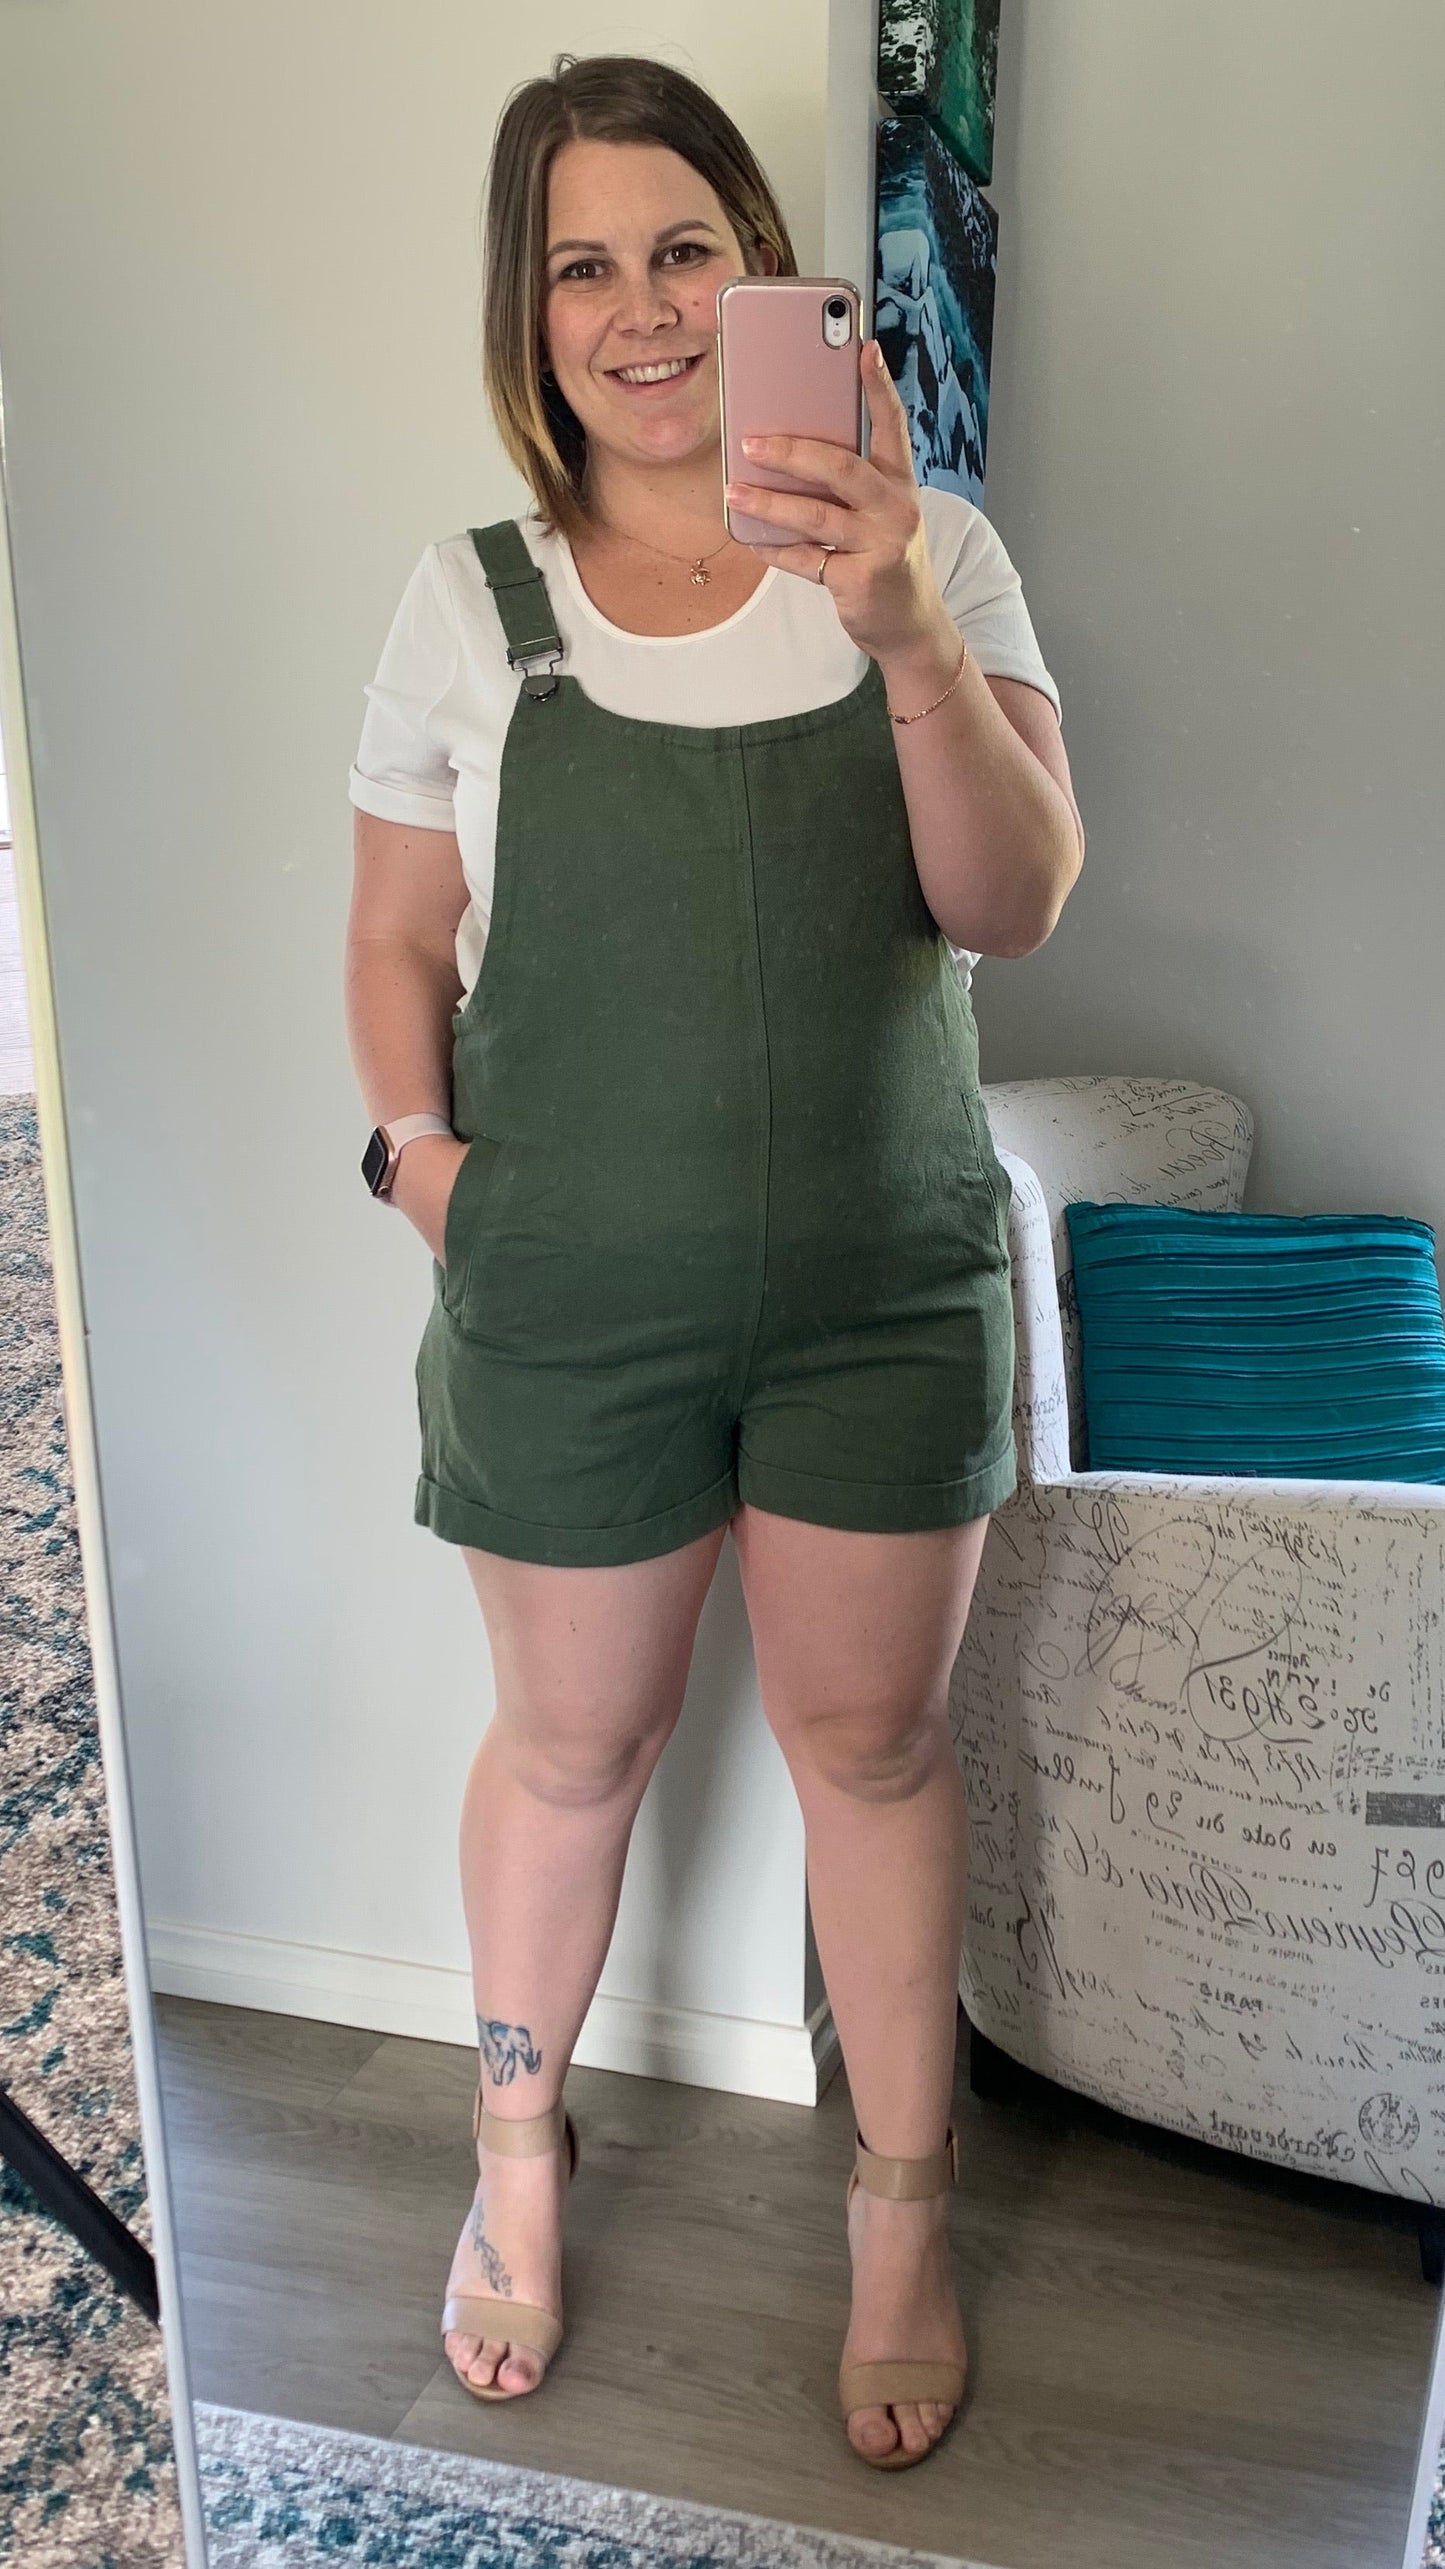 
Short denim overalls
Pockets
True to size
Danika is wearing a size 12 

Also available in PINK and BLACK - Xanthe Short Dungarees - Ebby and I